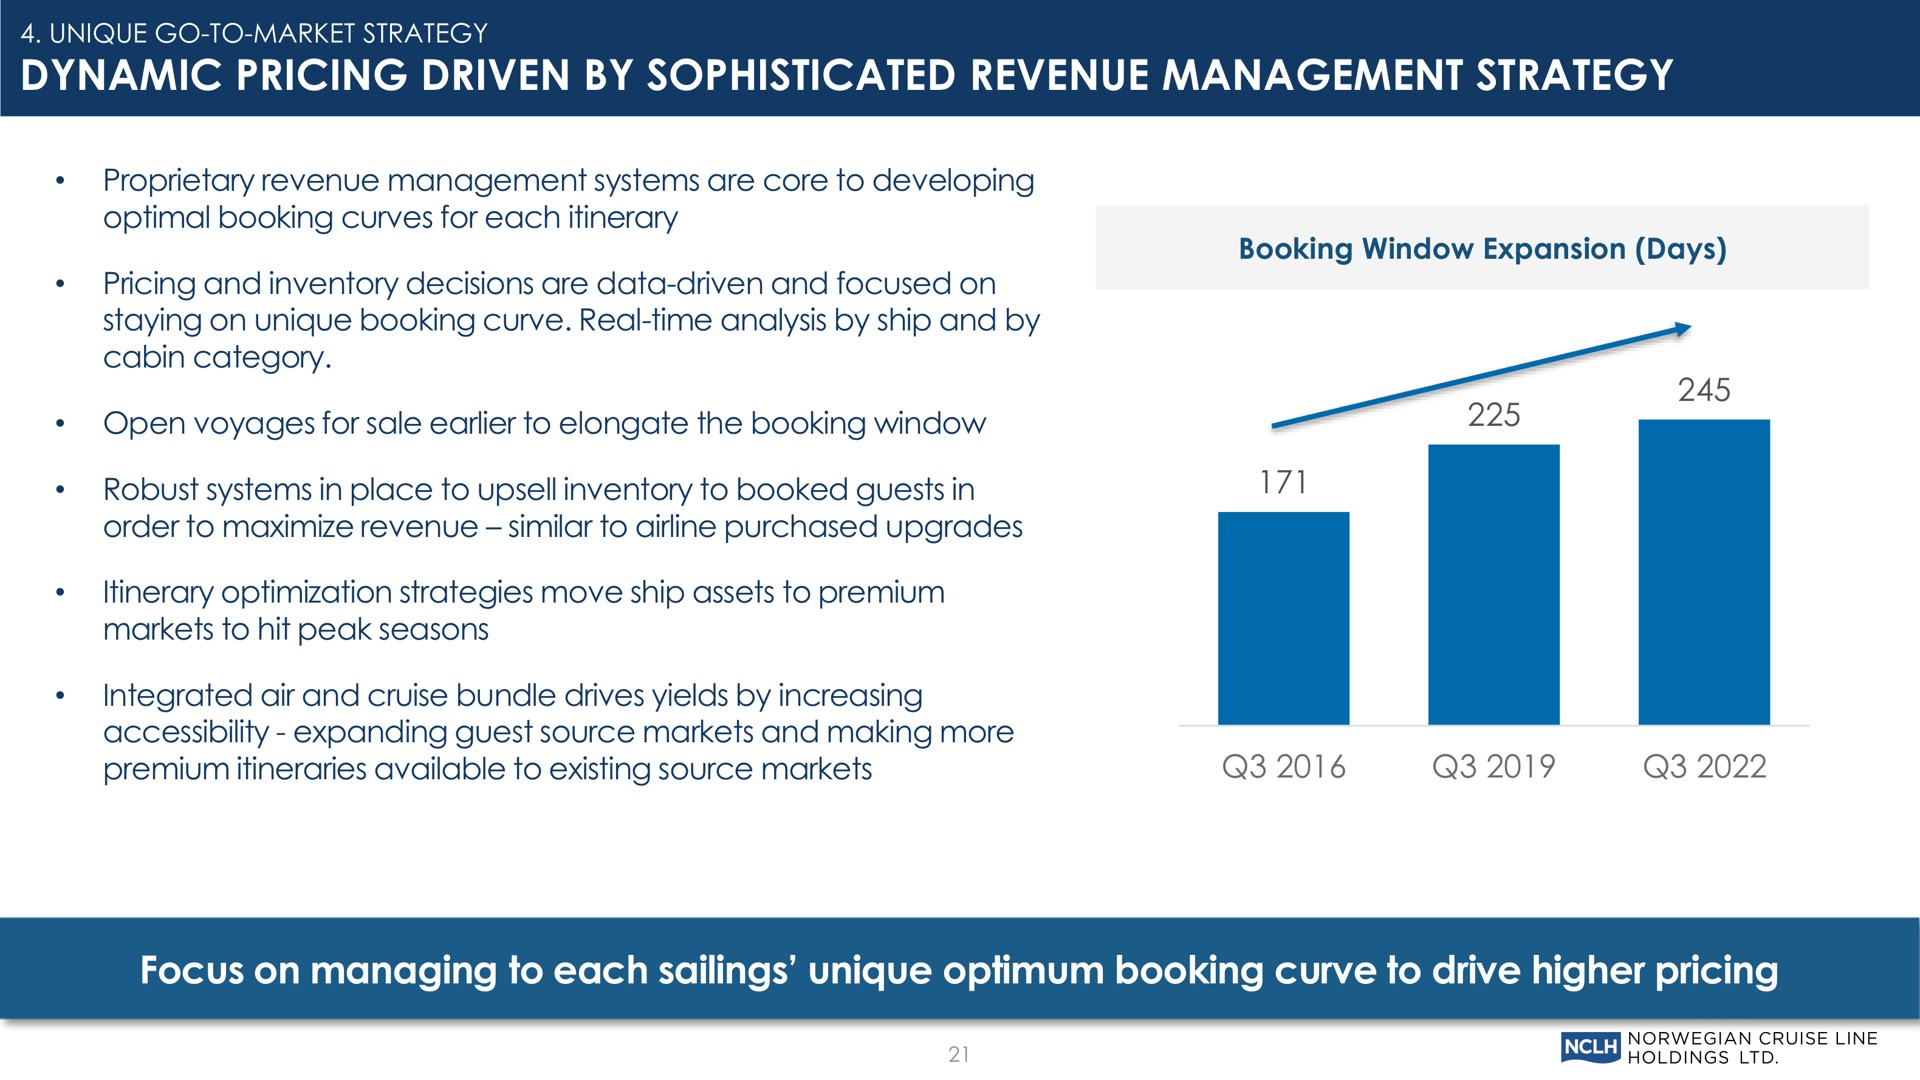 dynamic pricing driven by sophisticated revenue management strategy focus on managing to each sailings unique optimum booking curve to drive higher pricing | Norwegian Cruise Line